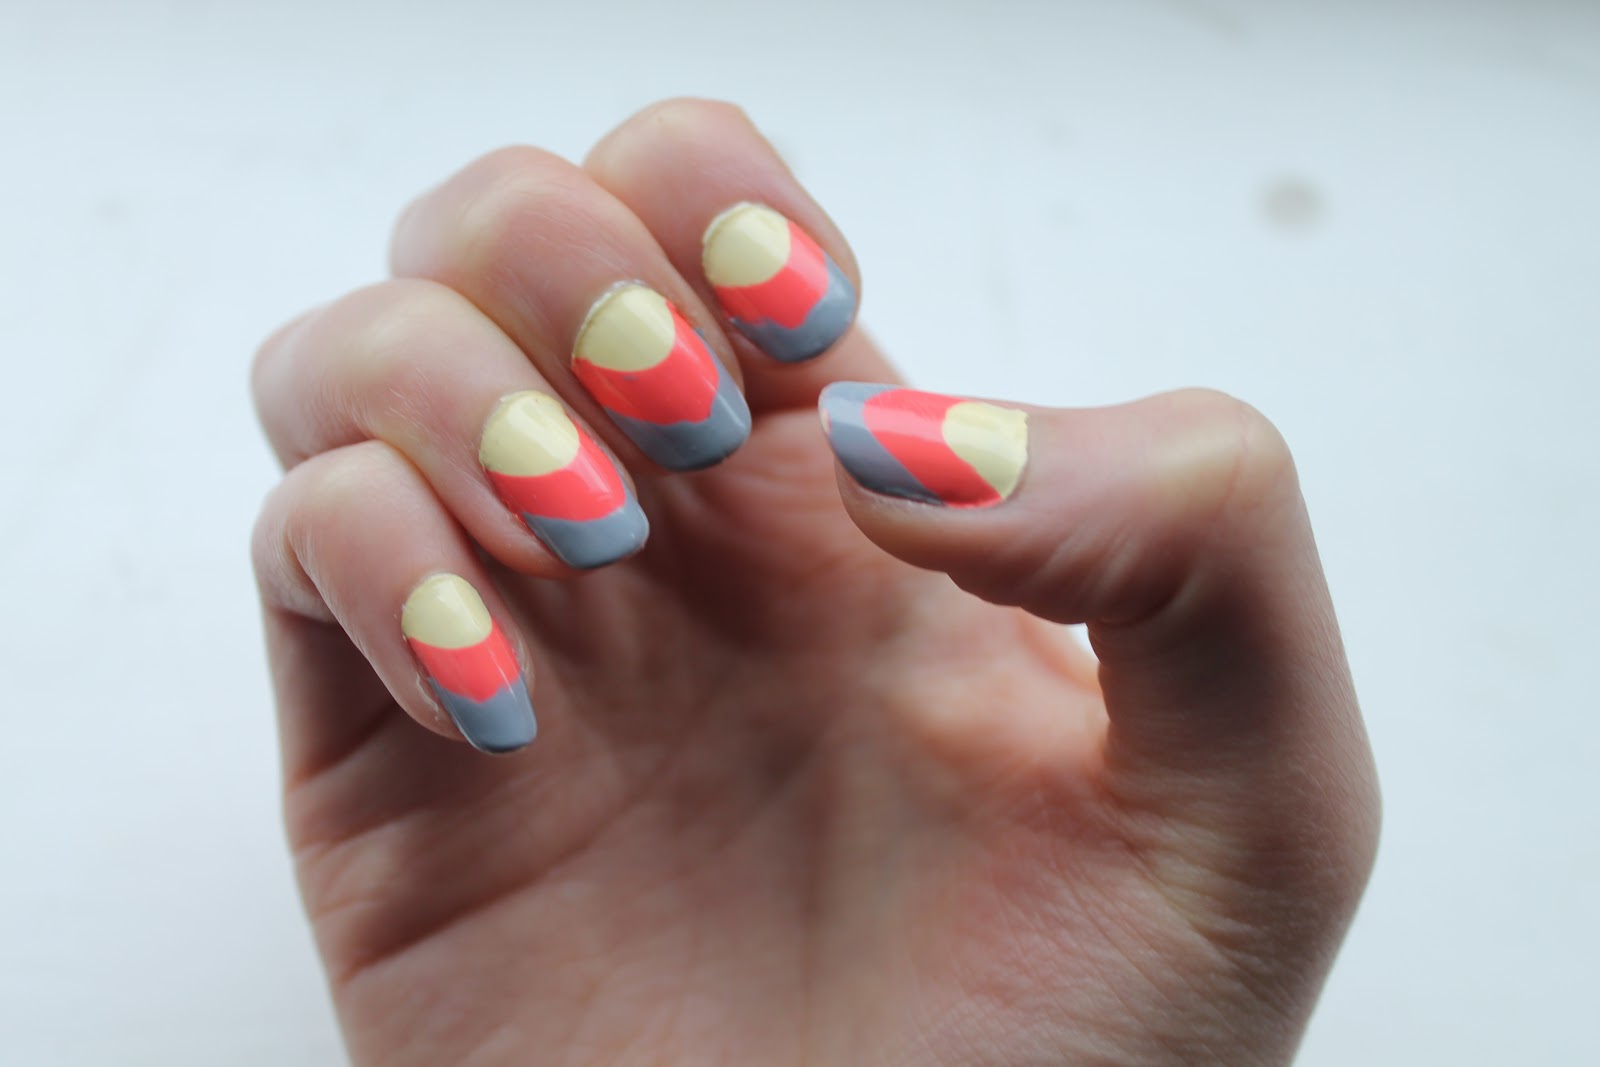 2. 100+ Awesome Nail Art Ideas for Short Nails - wide 5